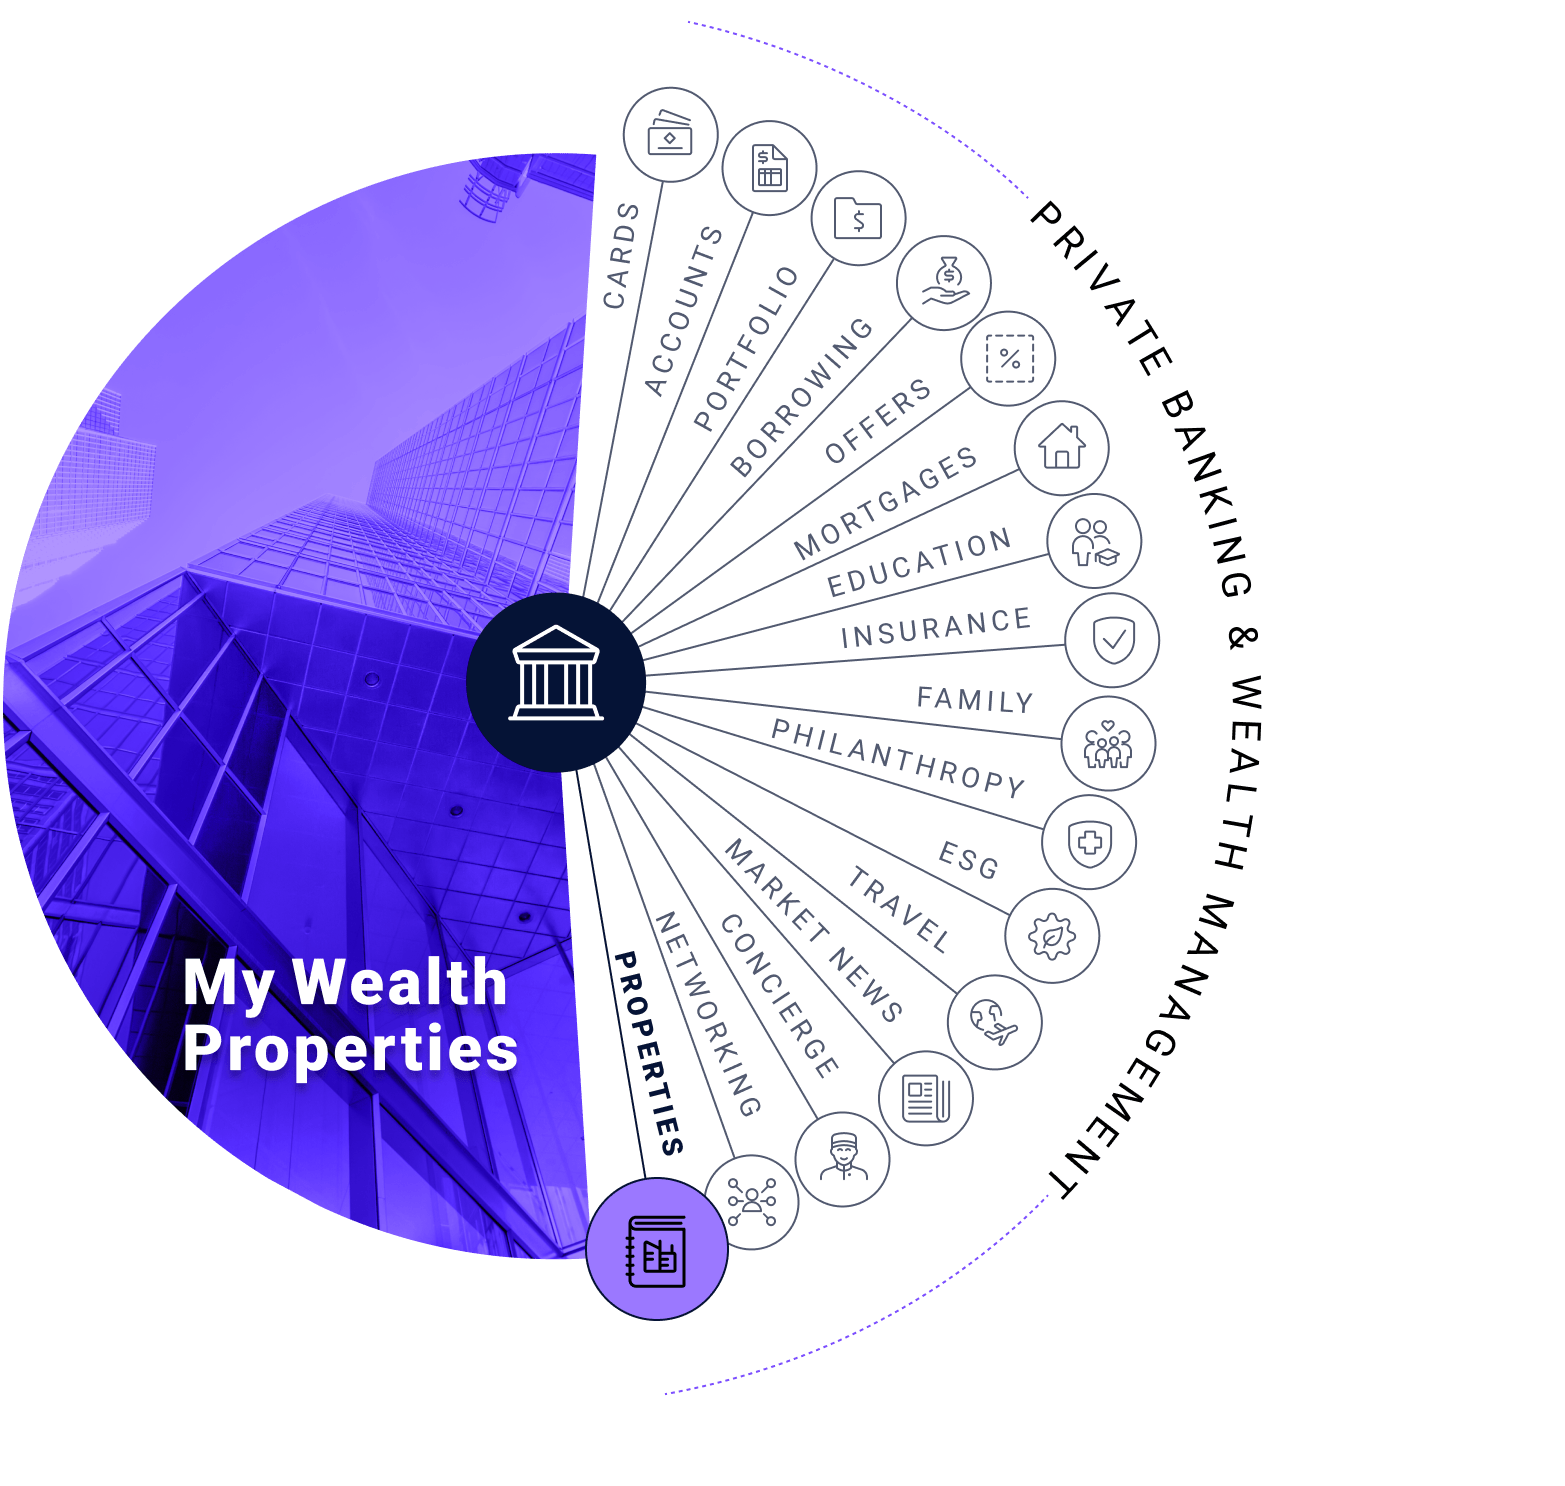 My Wealth Properties: cards, accounts, portfolio, borrowing, offers, mortgages, education, insurance, family, philanthropy, esg, travel, market news, concierge, networking, and properties